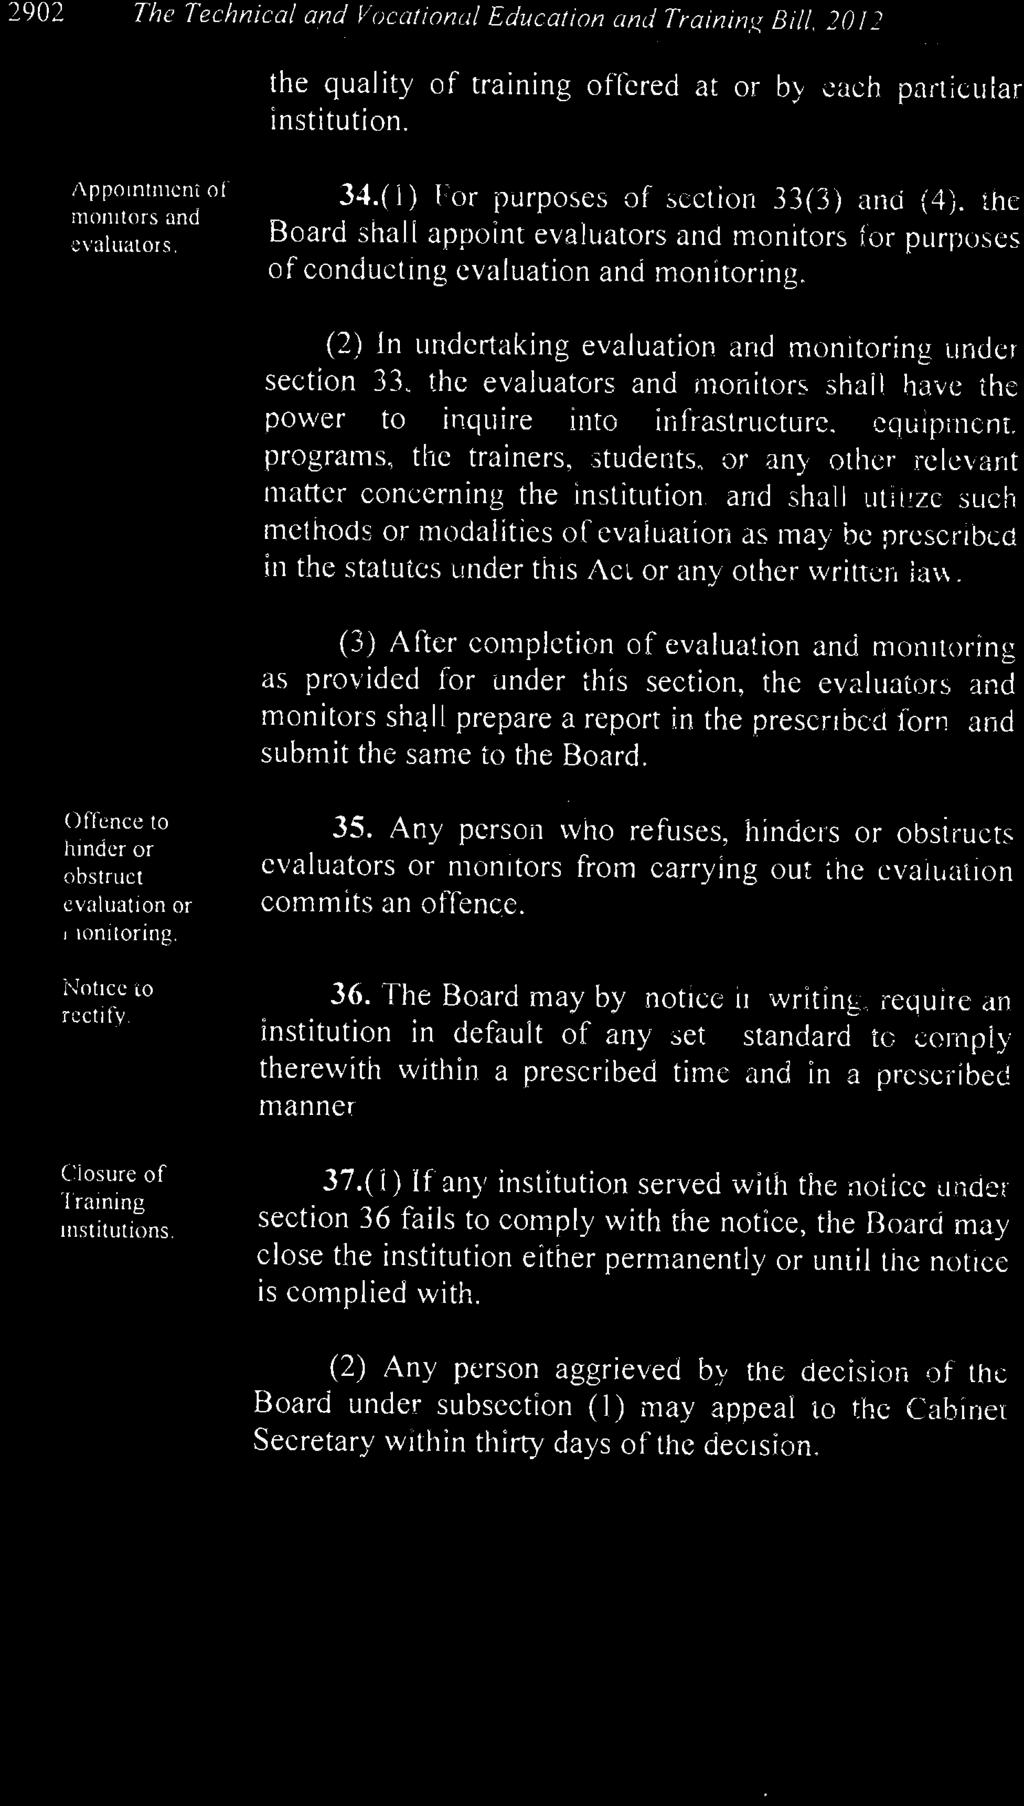 Any person who refuses, hinders or obsiructs evaluators or monitors from carrying out the evaluation commits an offence. 36.